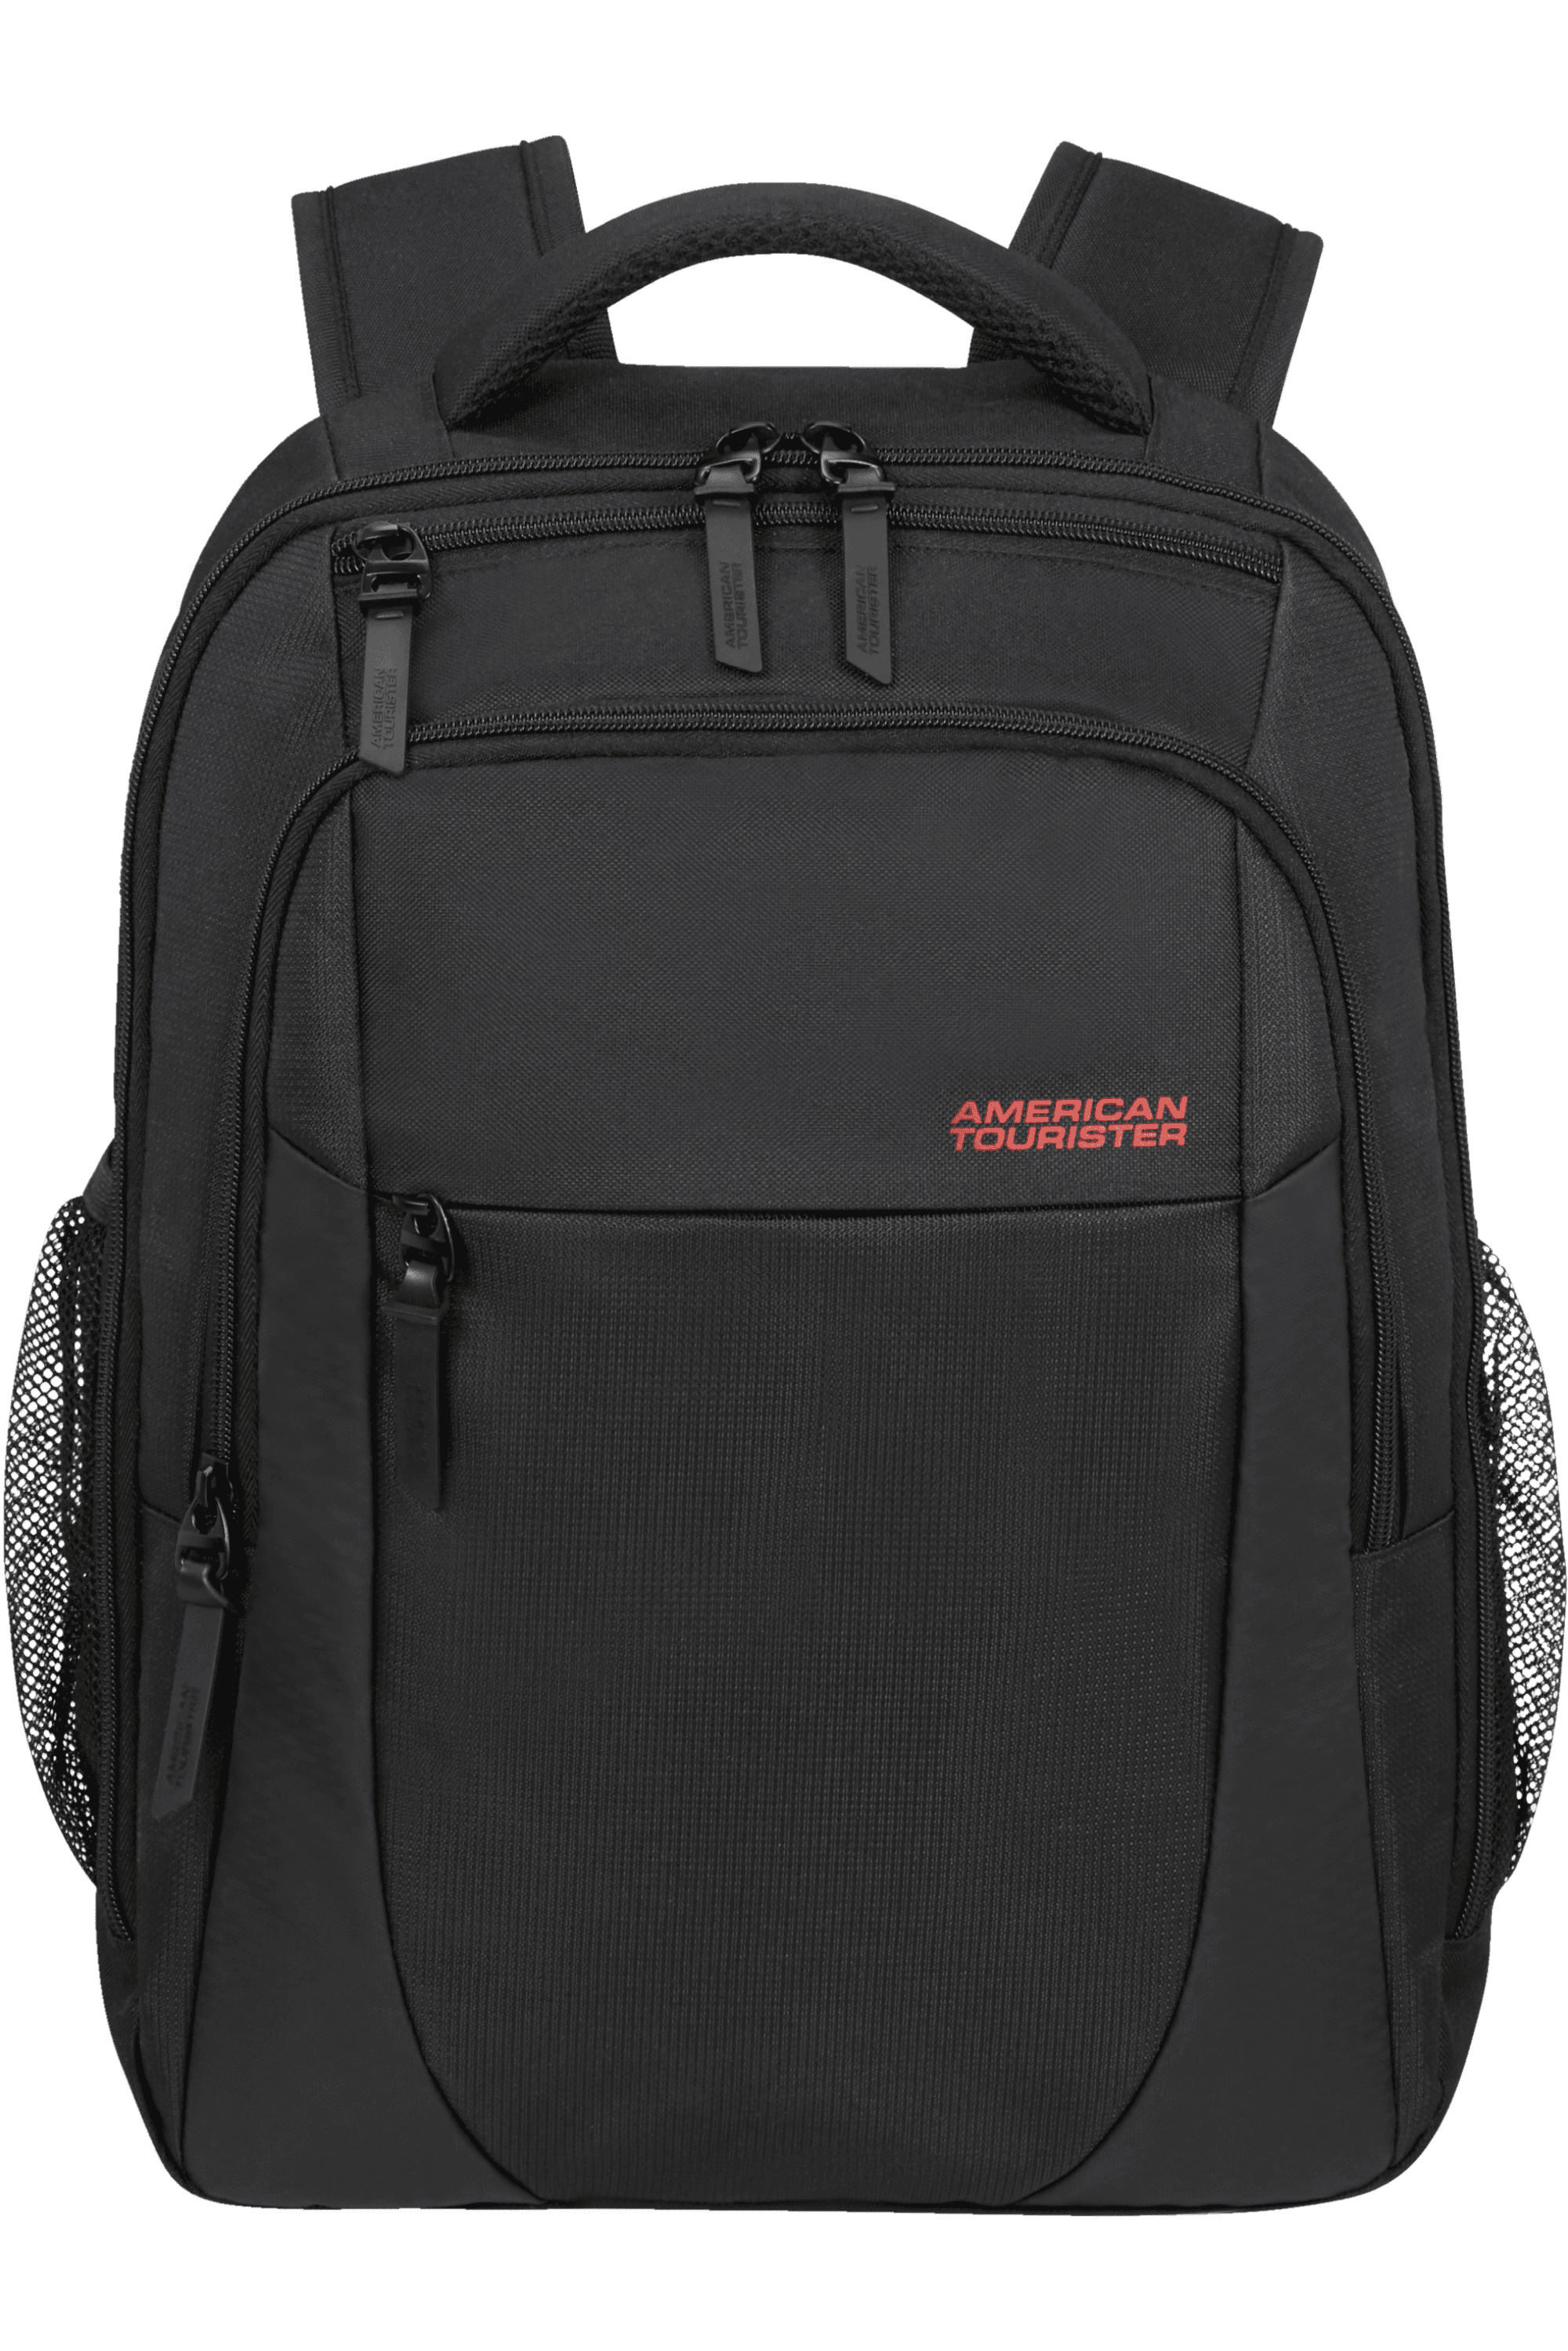 Best Laptop Bags: 10 Best Laptop Bags in India Starting Just at Rs. 500 -  The Economic Times